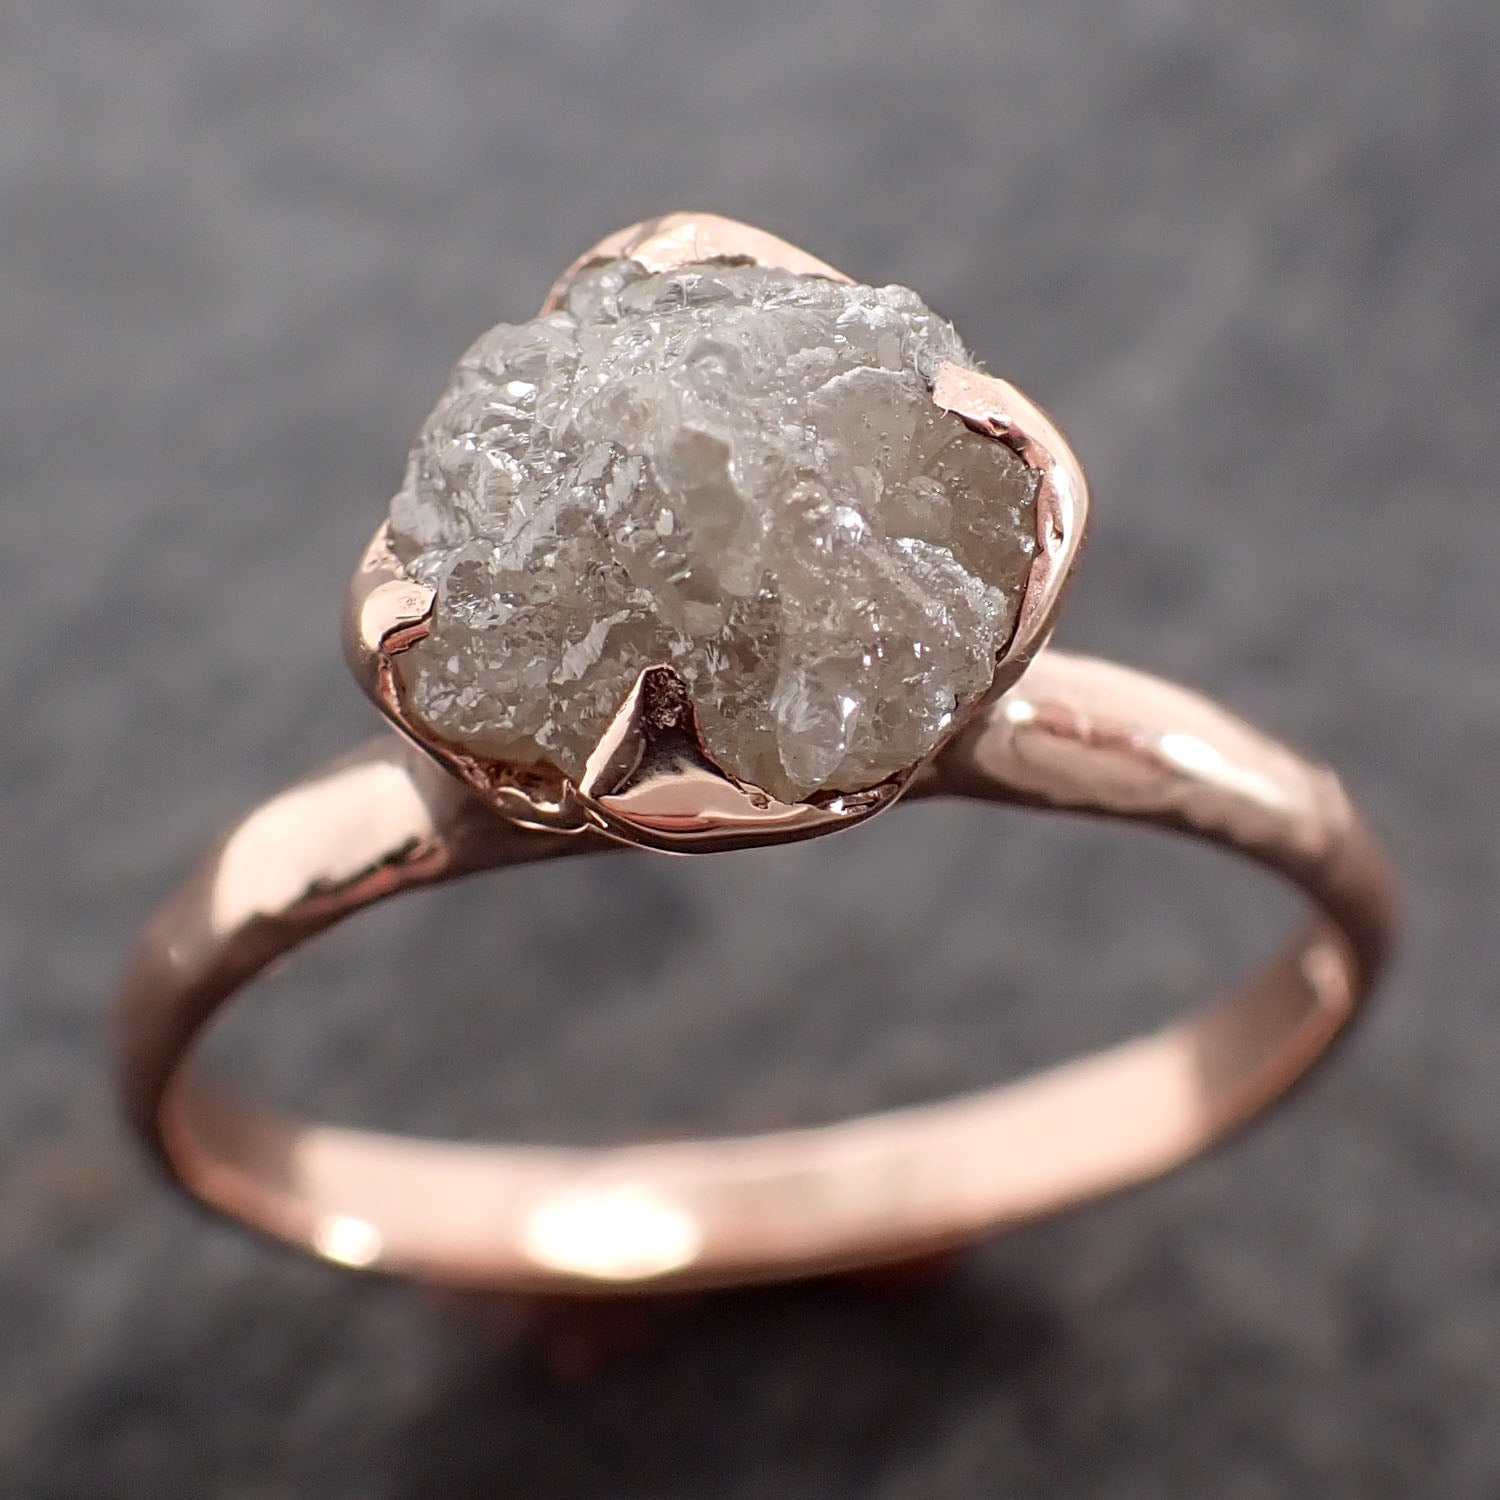 Raw Rough UnCut Diamond Engagement Ring Rough Diamond Solitaire Recycled 14k Rose gold Conflict Free Diamond Wedding Promise byAngeline 2705